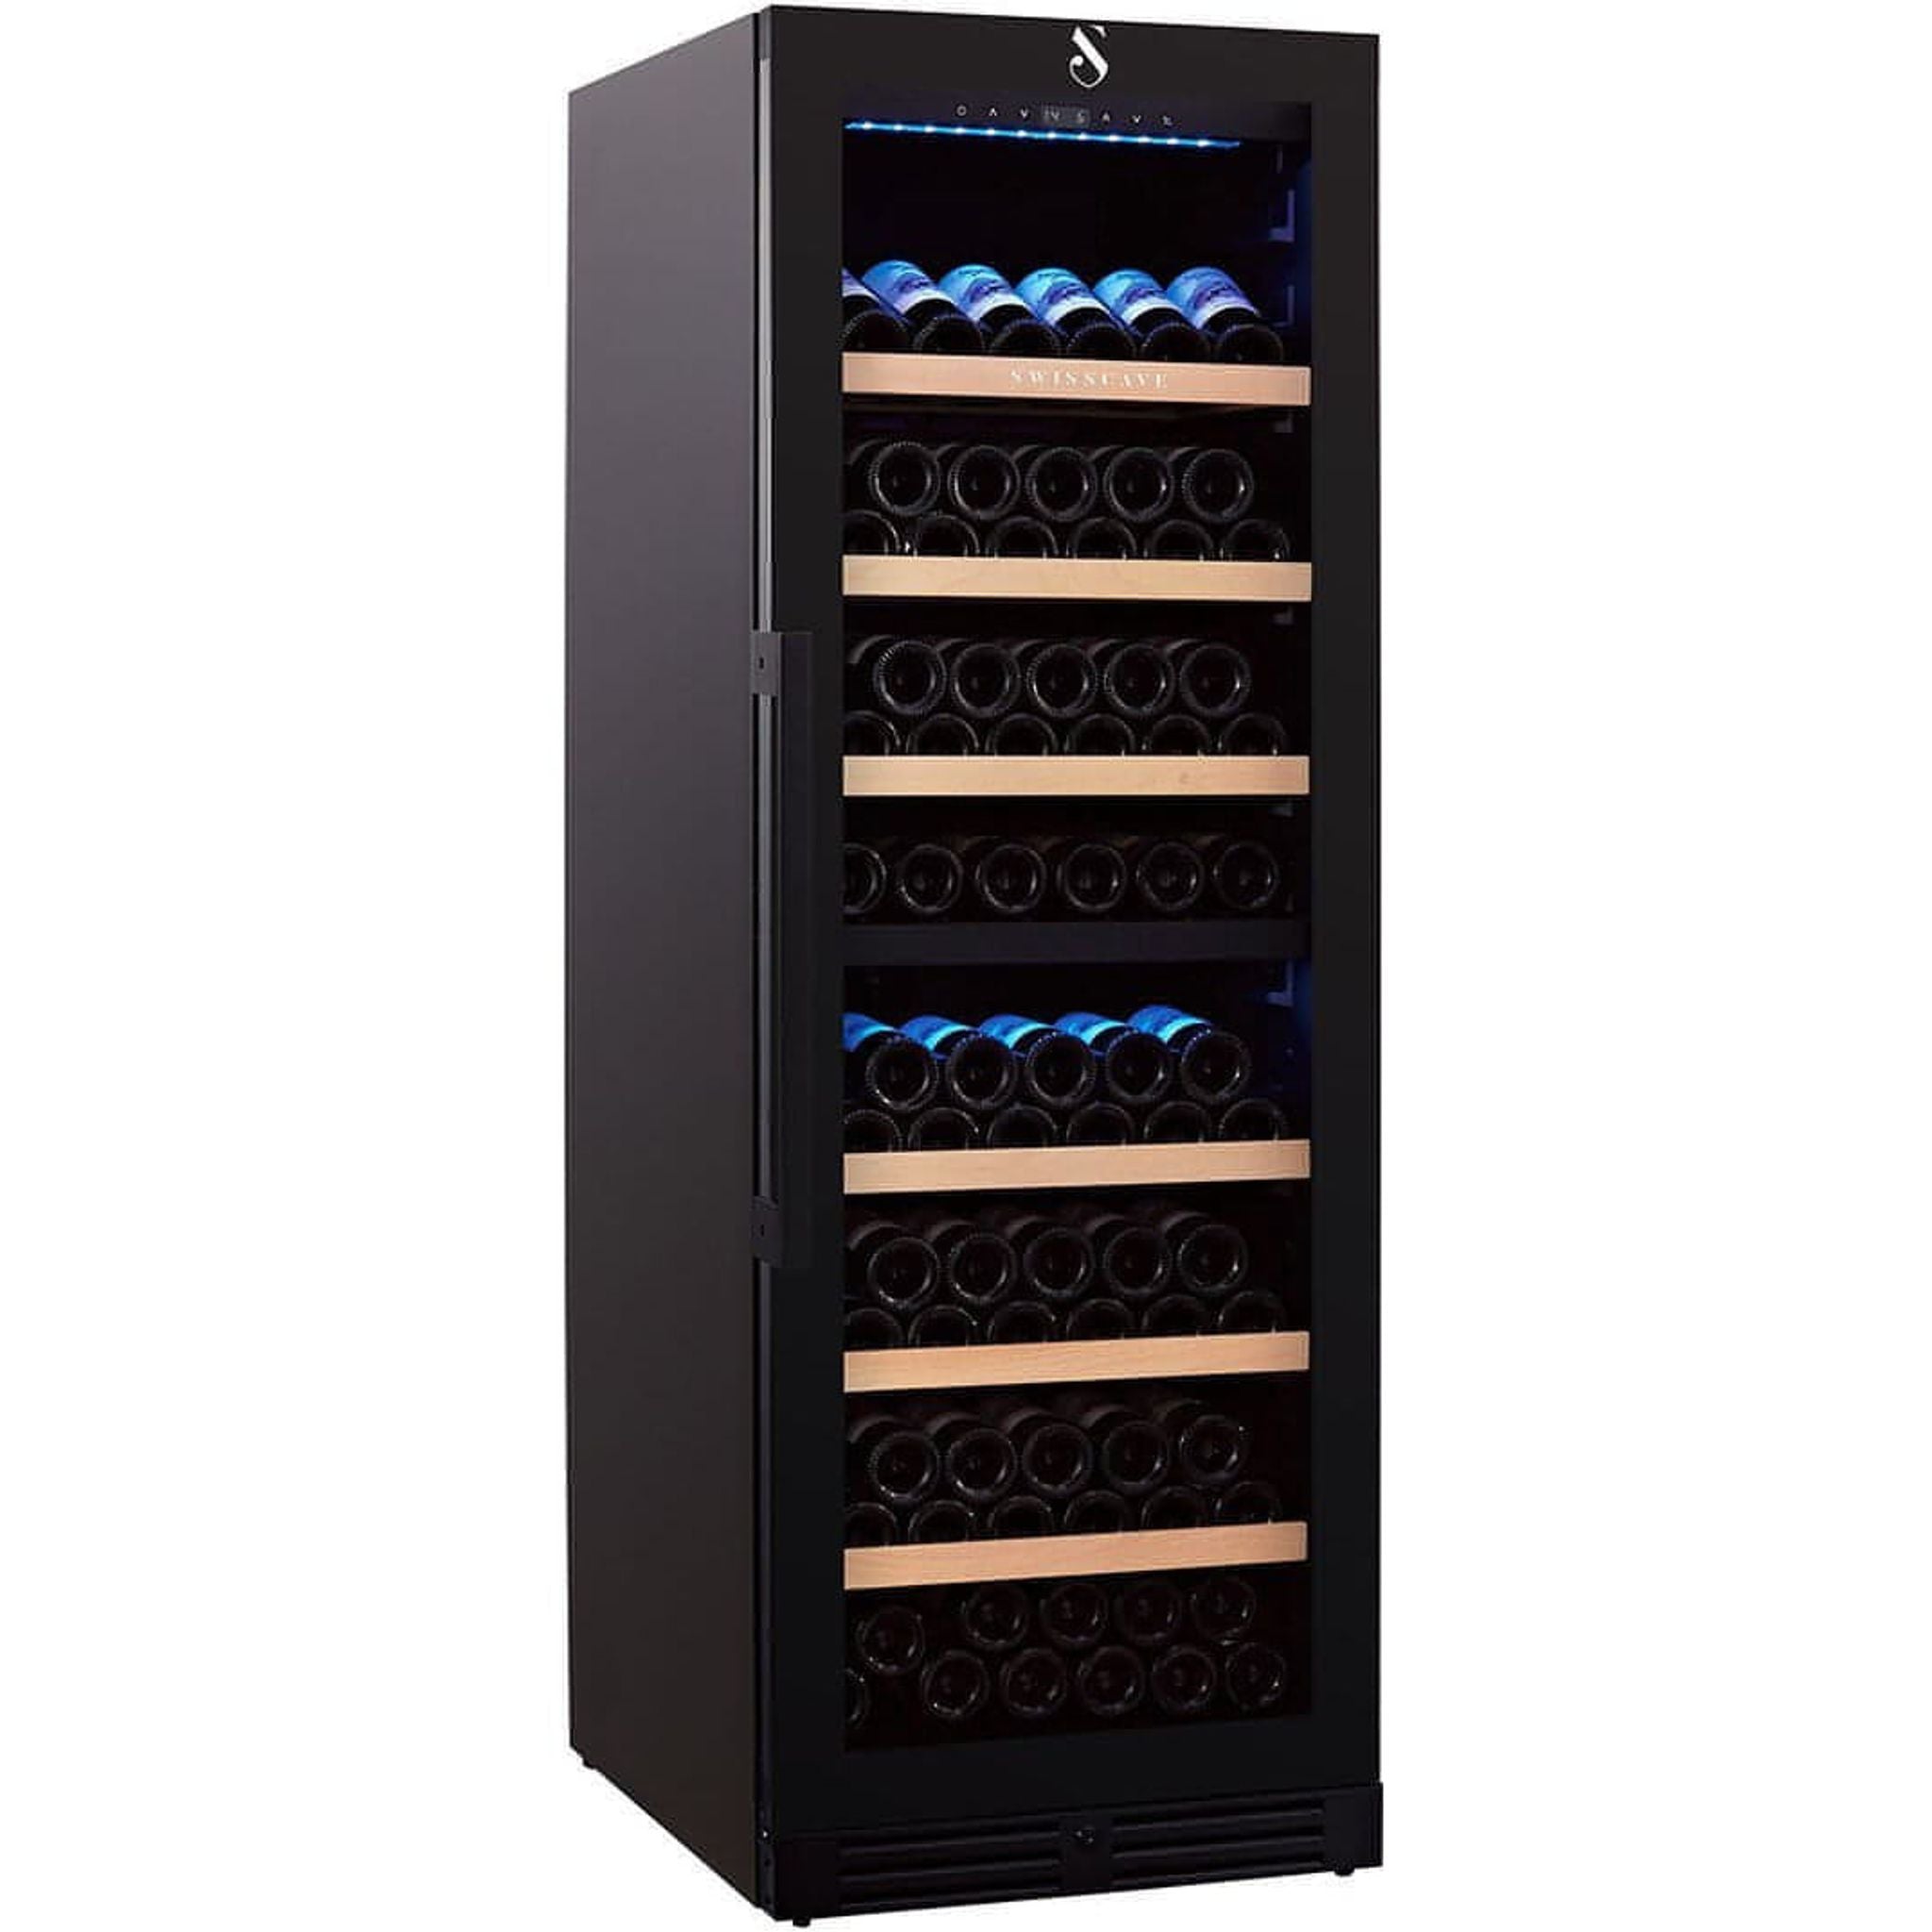 SWISSCAVE - Classic Edition 154 Bottles Dual Zone Wine Cooler WL455DF